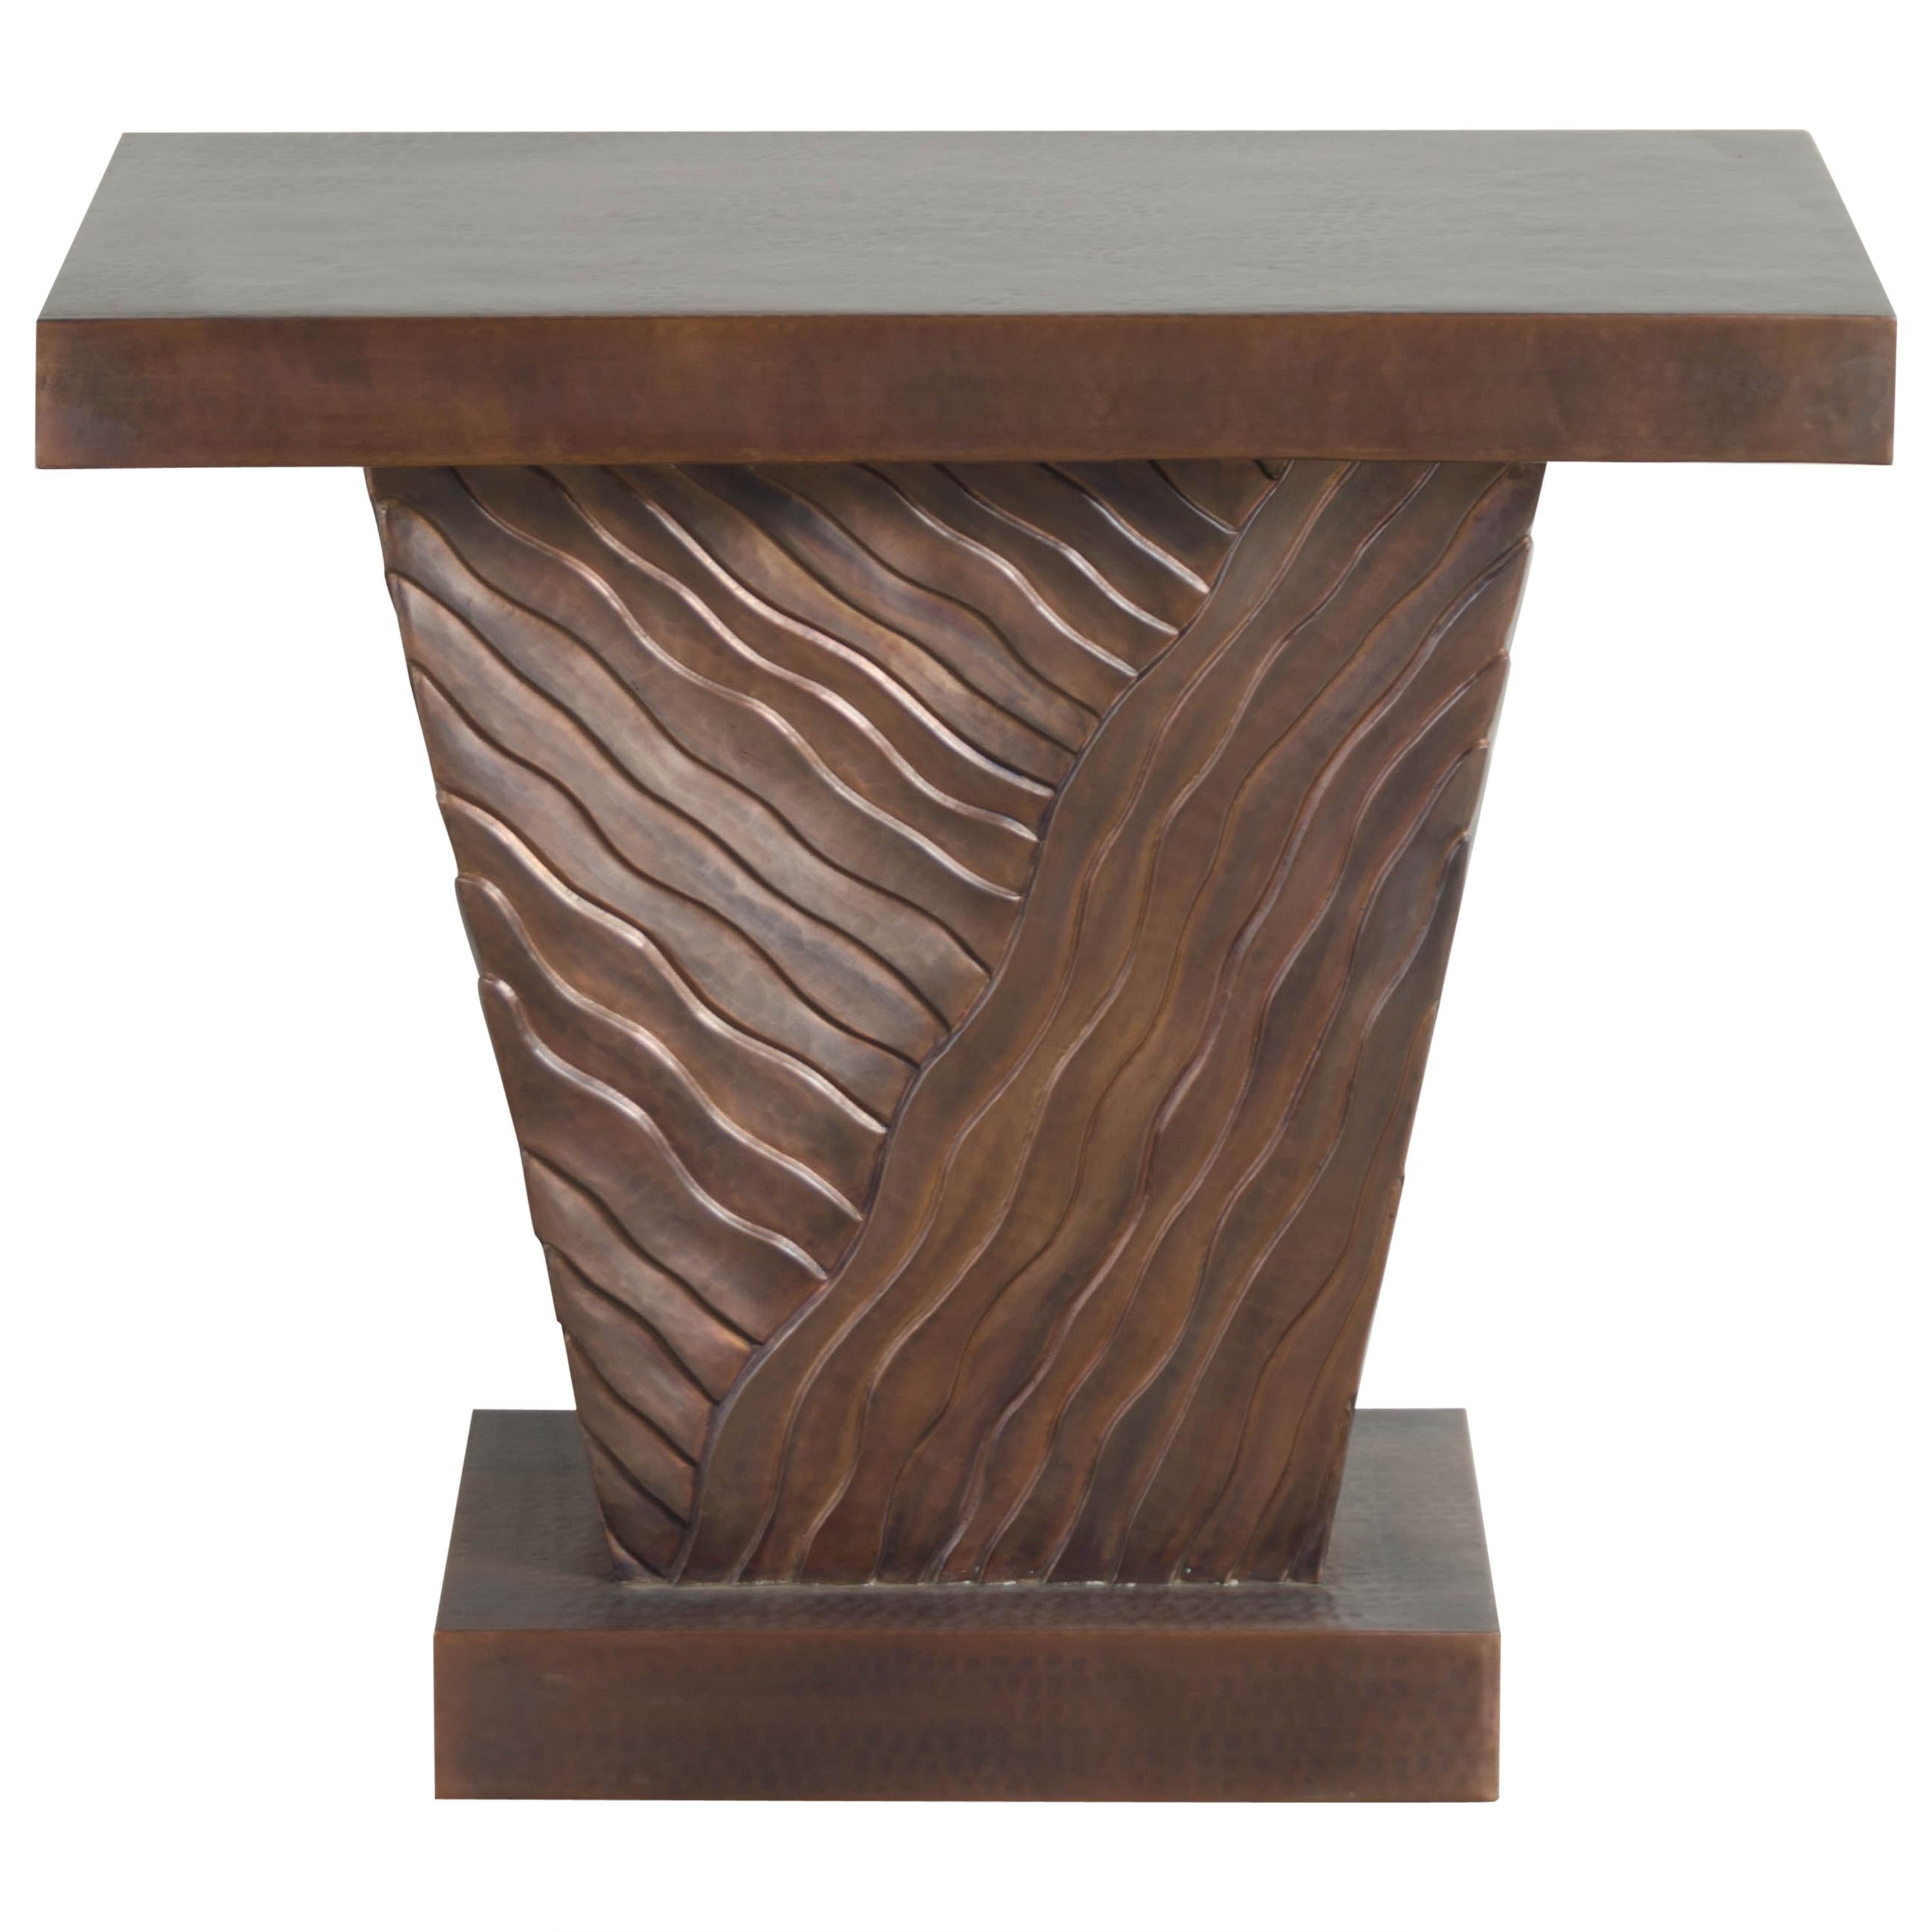 Diagonal Cascade Side Table, Antique Copper by Robert Kuo, Hand Repoussé